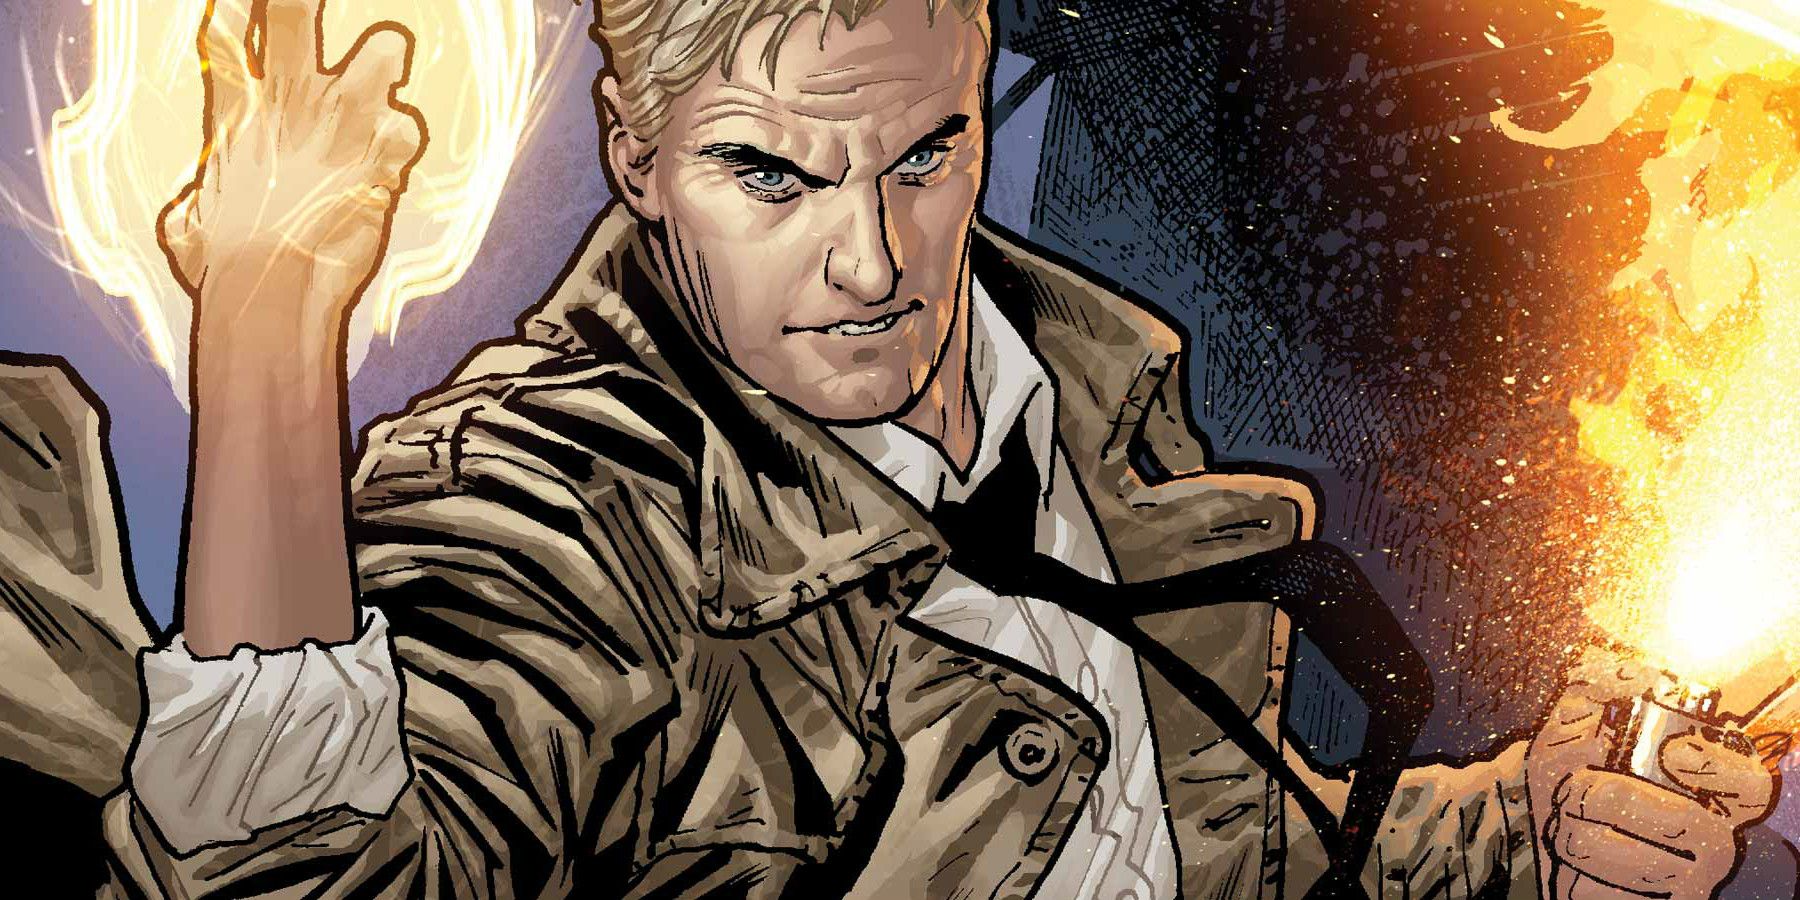 John Constantine Takes His Ultimate Form To Save DCs World